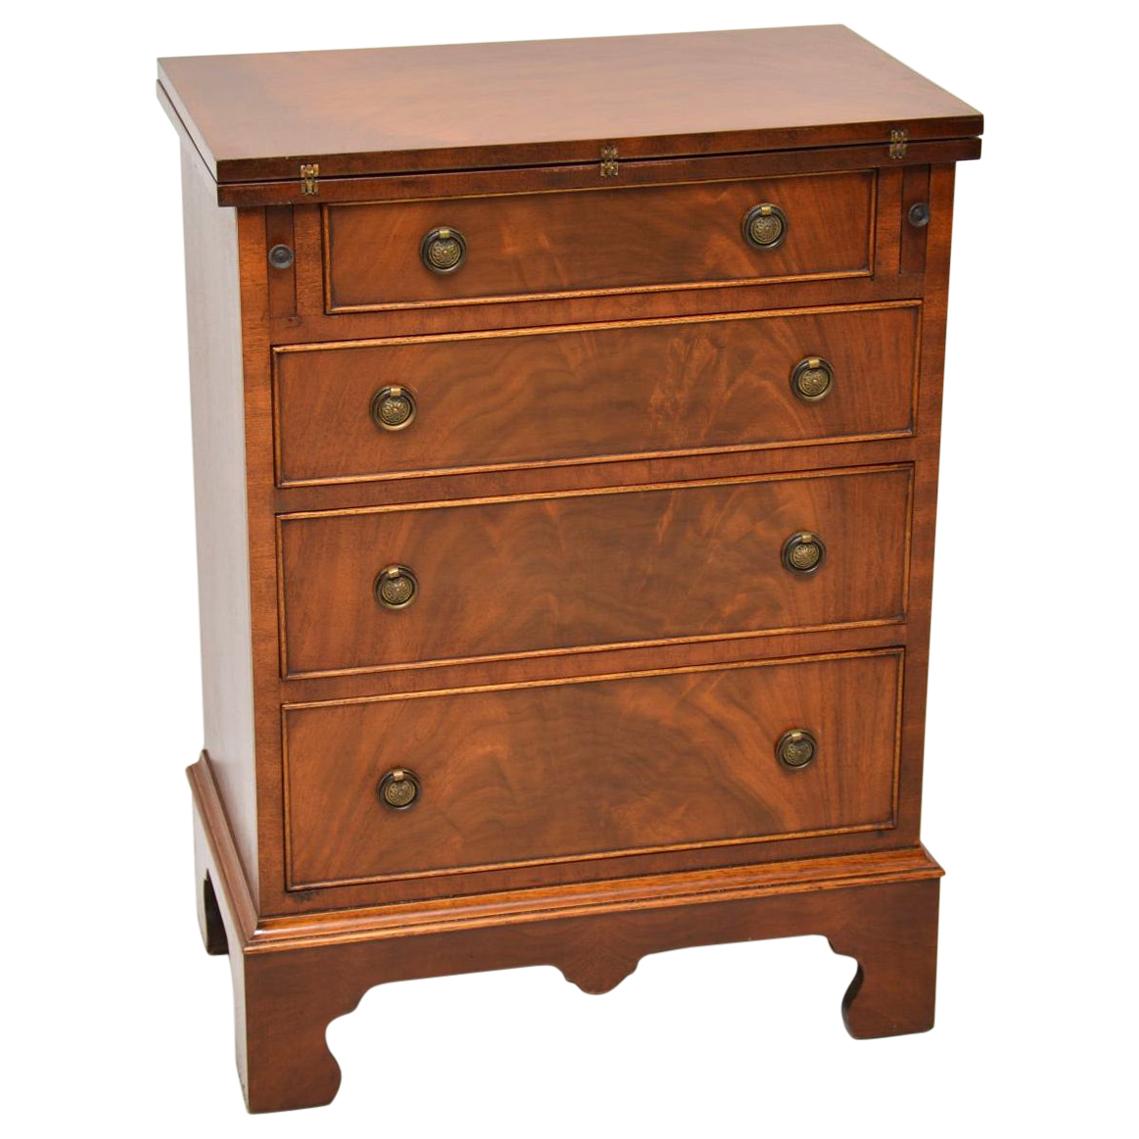 Antique Georgian Style Mahogany Bachelors Chest of Drawers